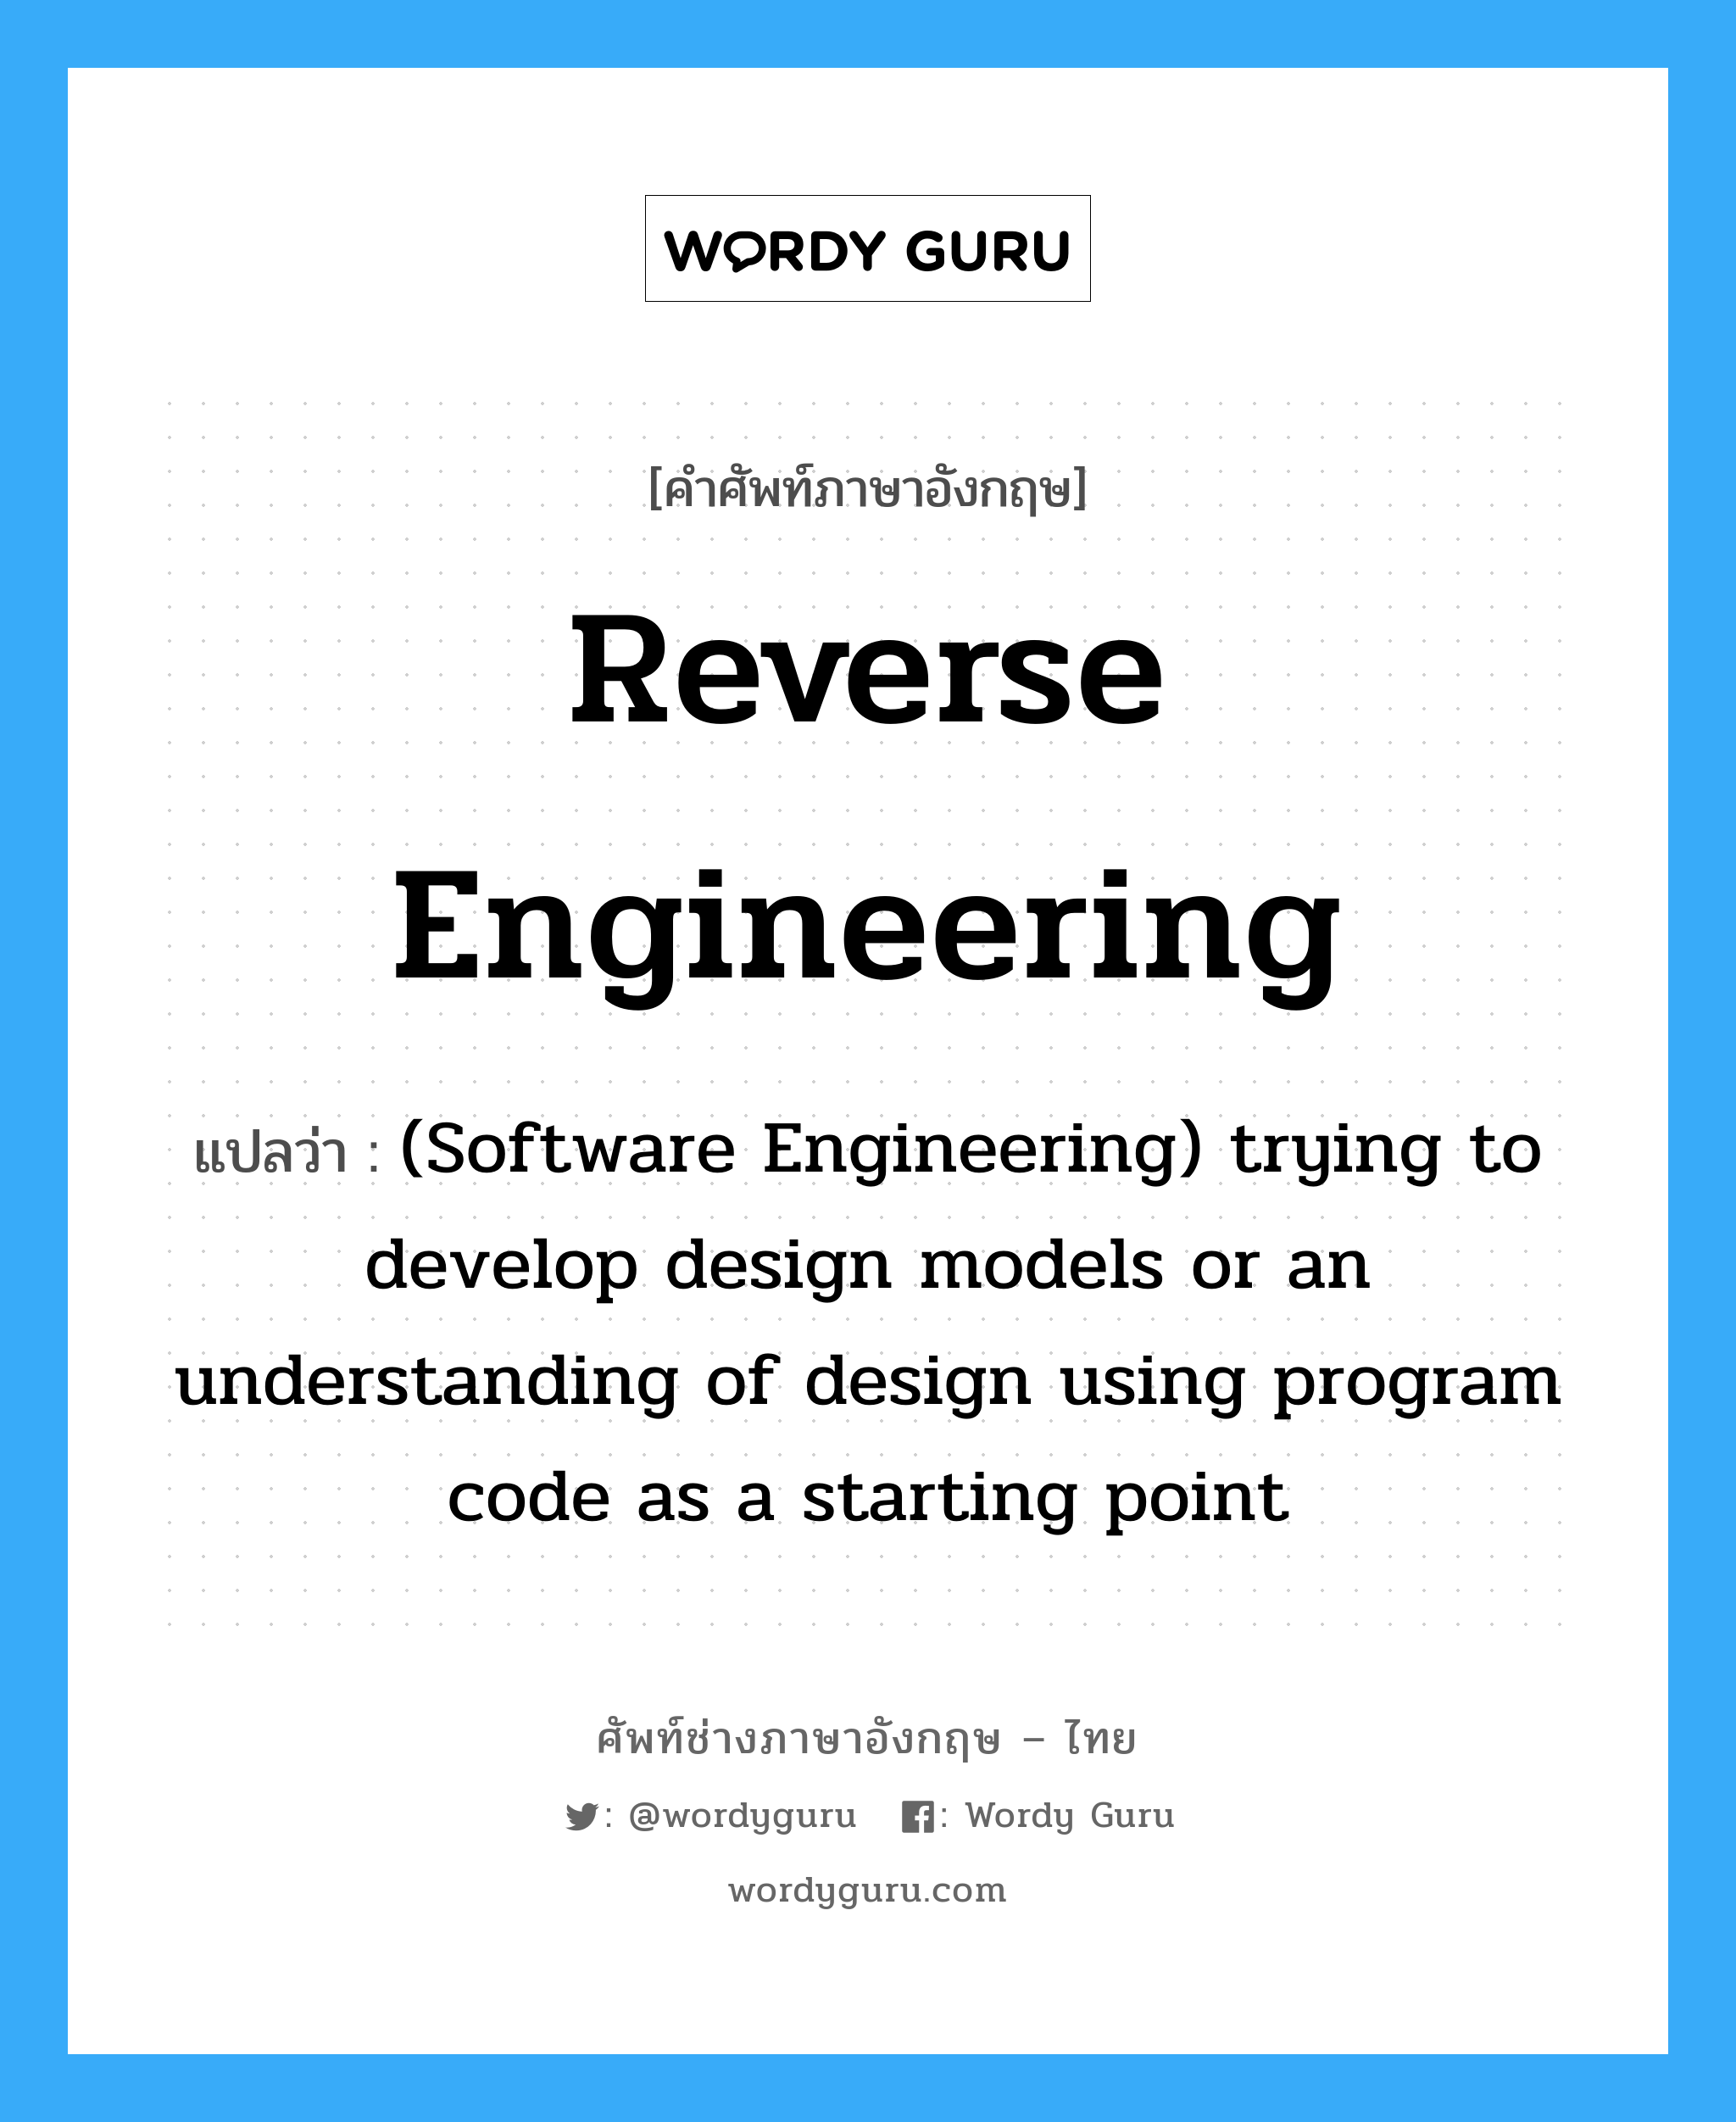 Reverse engineering แปลว่า?, คำศัพท์ช่างภาษาอังกฤษ - ไทย Reverse engineering คำศัพท์ภาษาอังกฤษ Reverse engineering แปลว่า (Software Engineering) trying to develop design models or an understanding of design using program code as a starting point